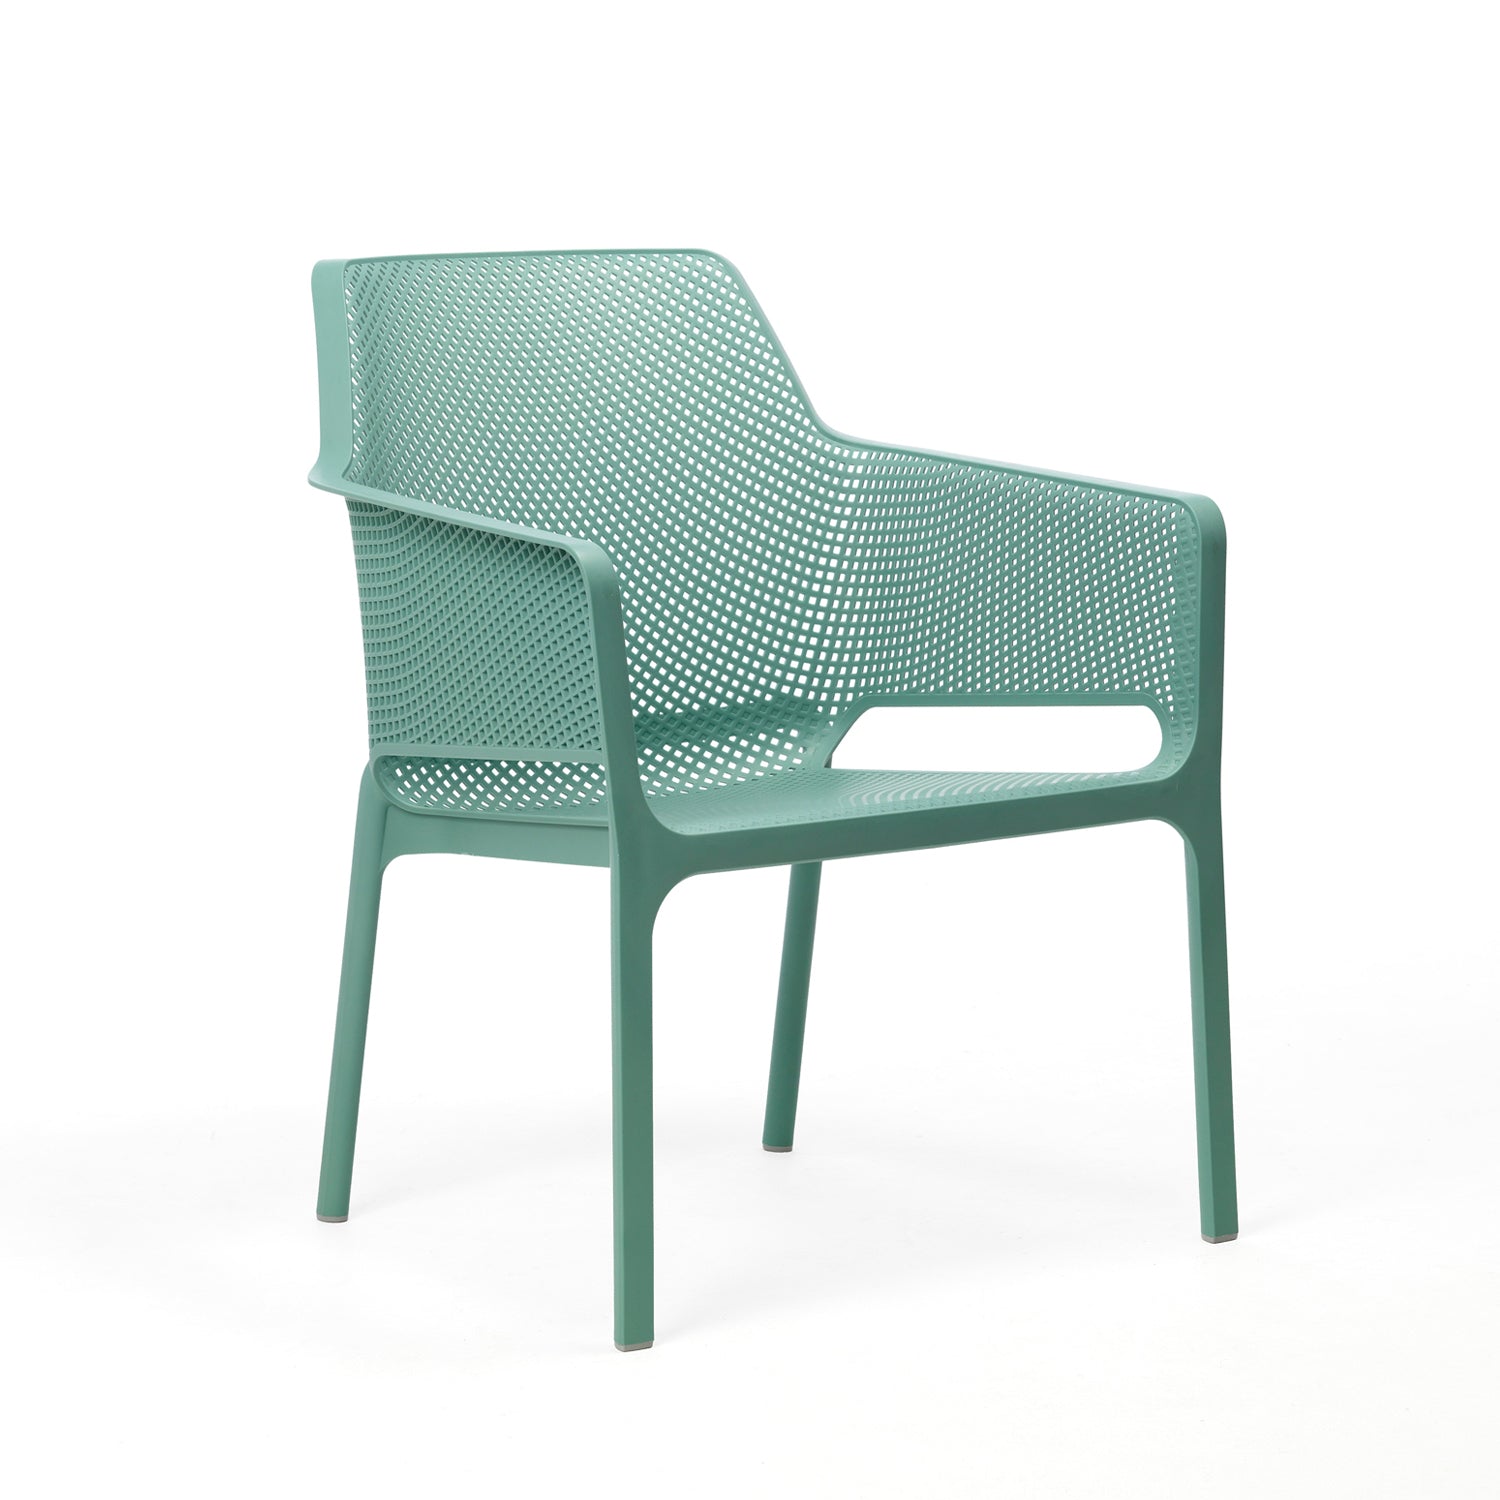 Net Relax Garden Chair By Nardi - Turquoise Set Of 6